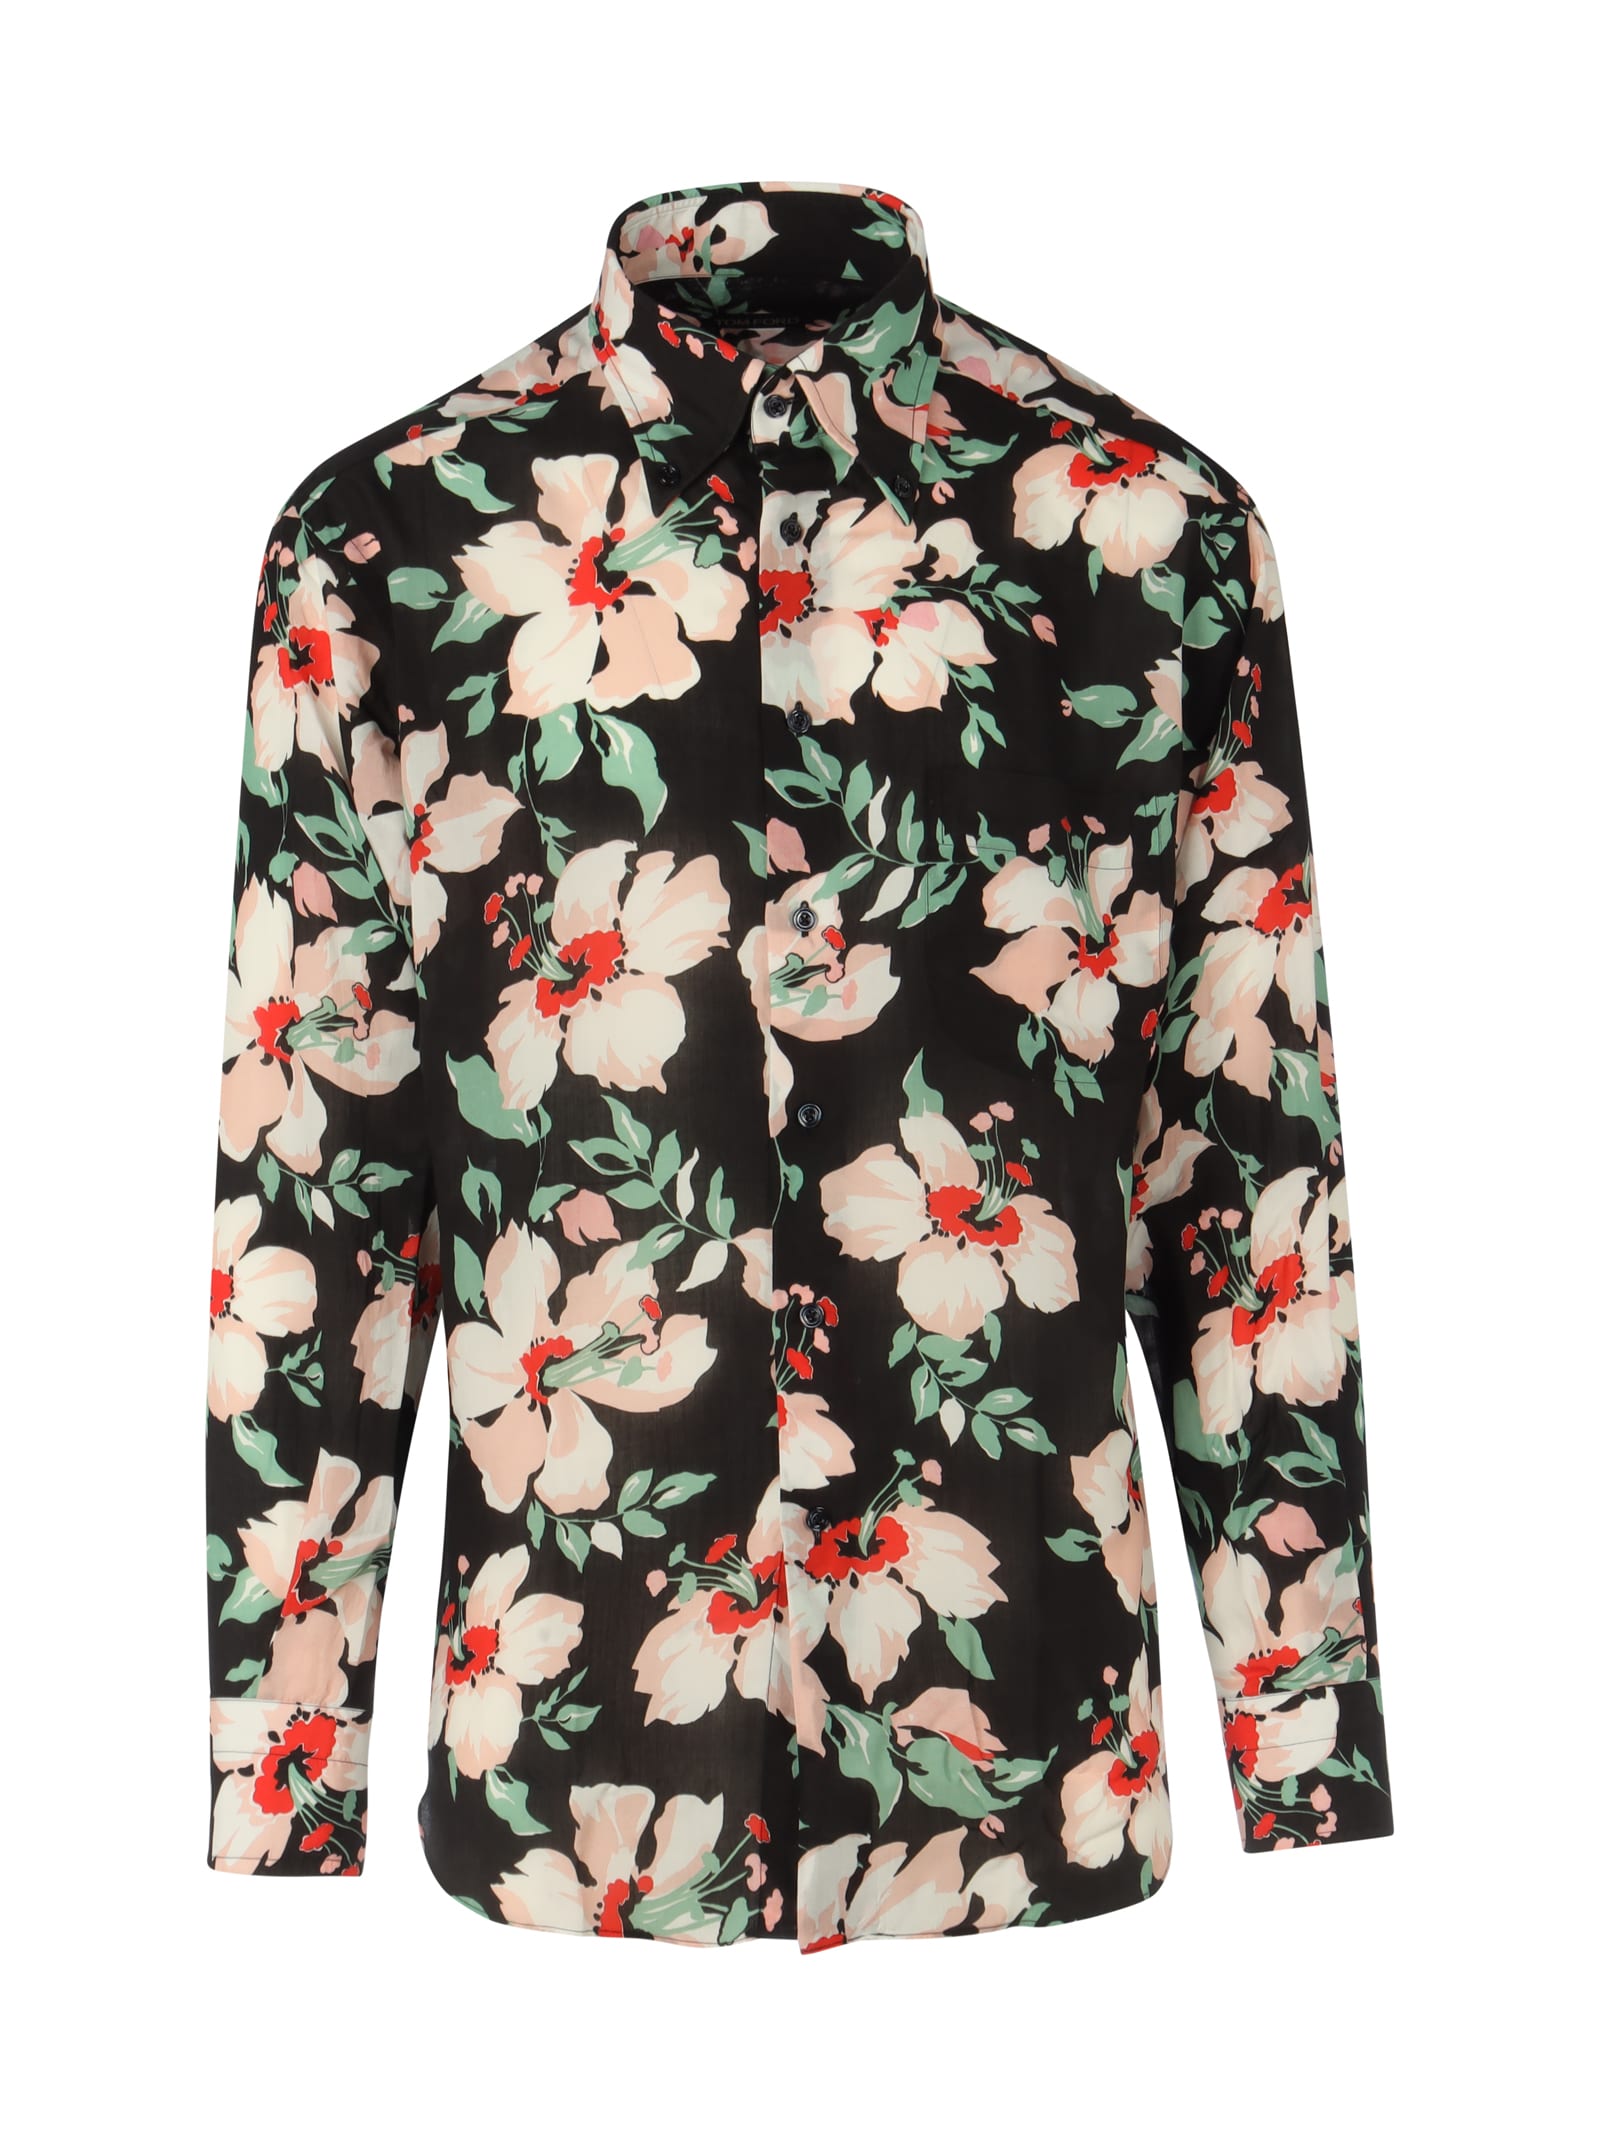 TOM FORD PAINTED FLORAL PRINTED SHIRT,11797834